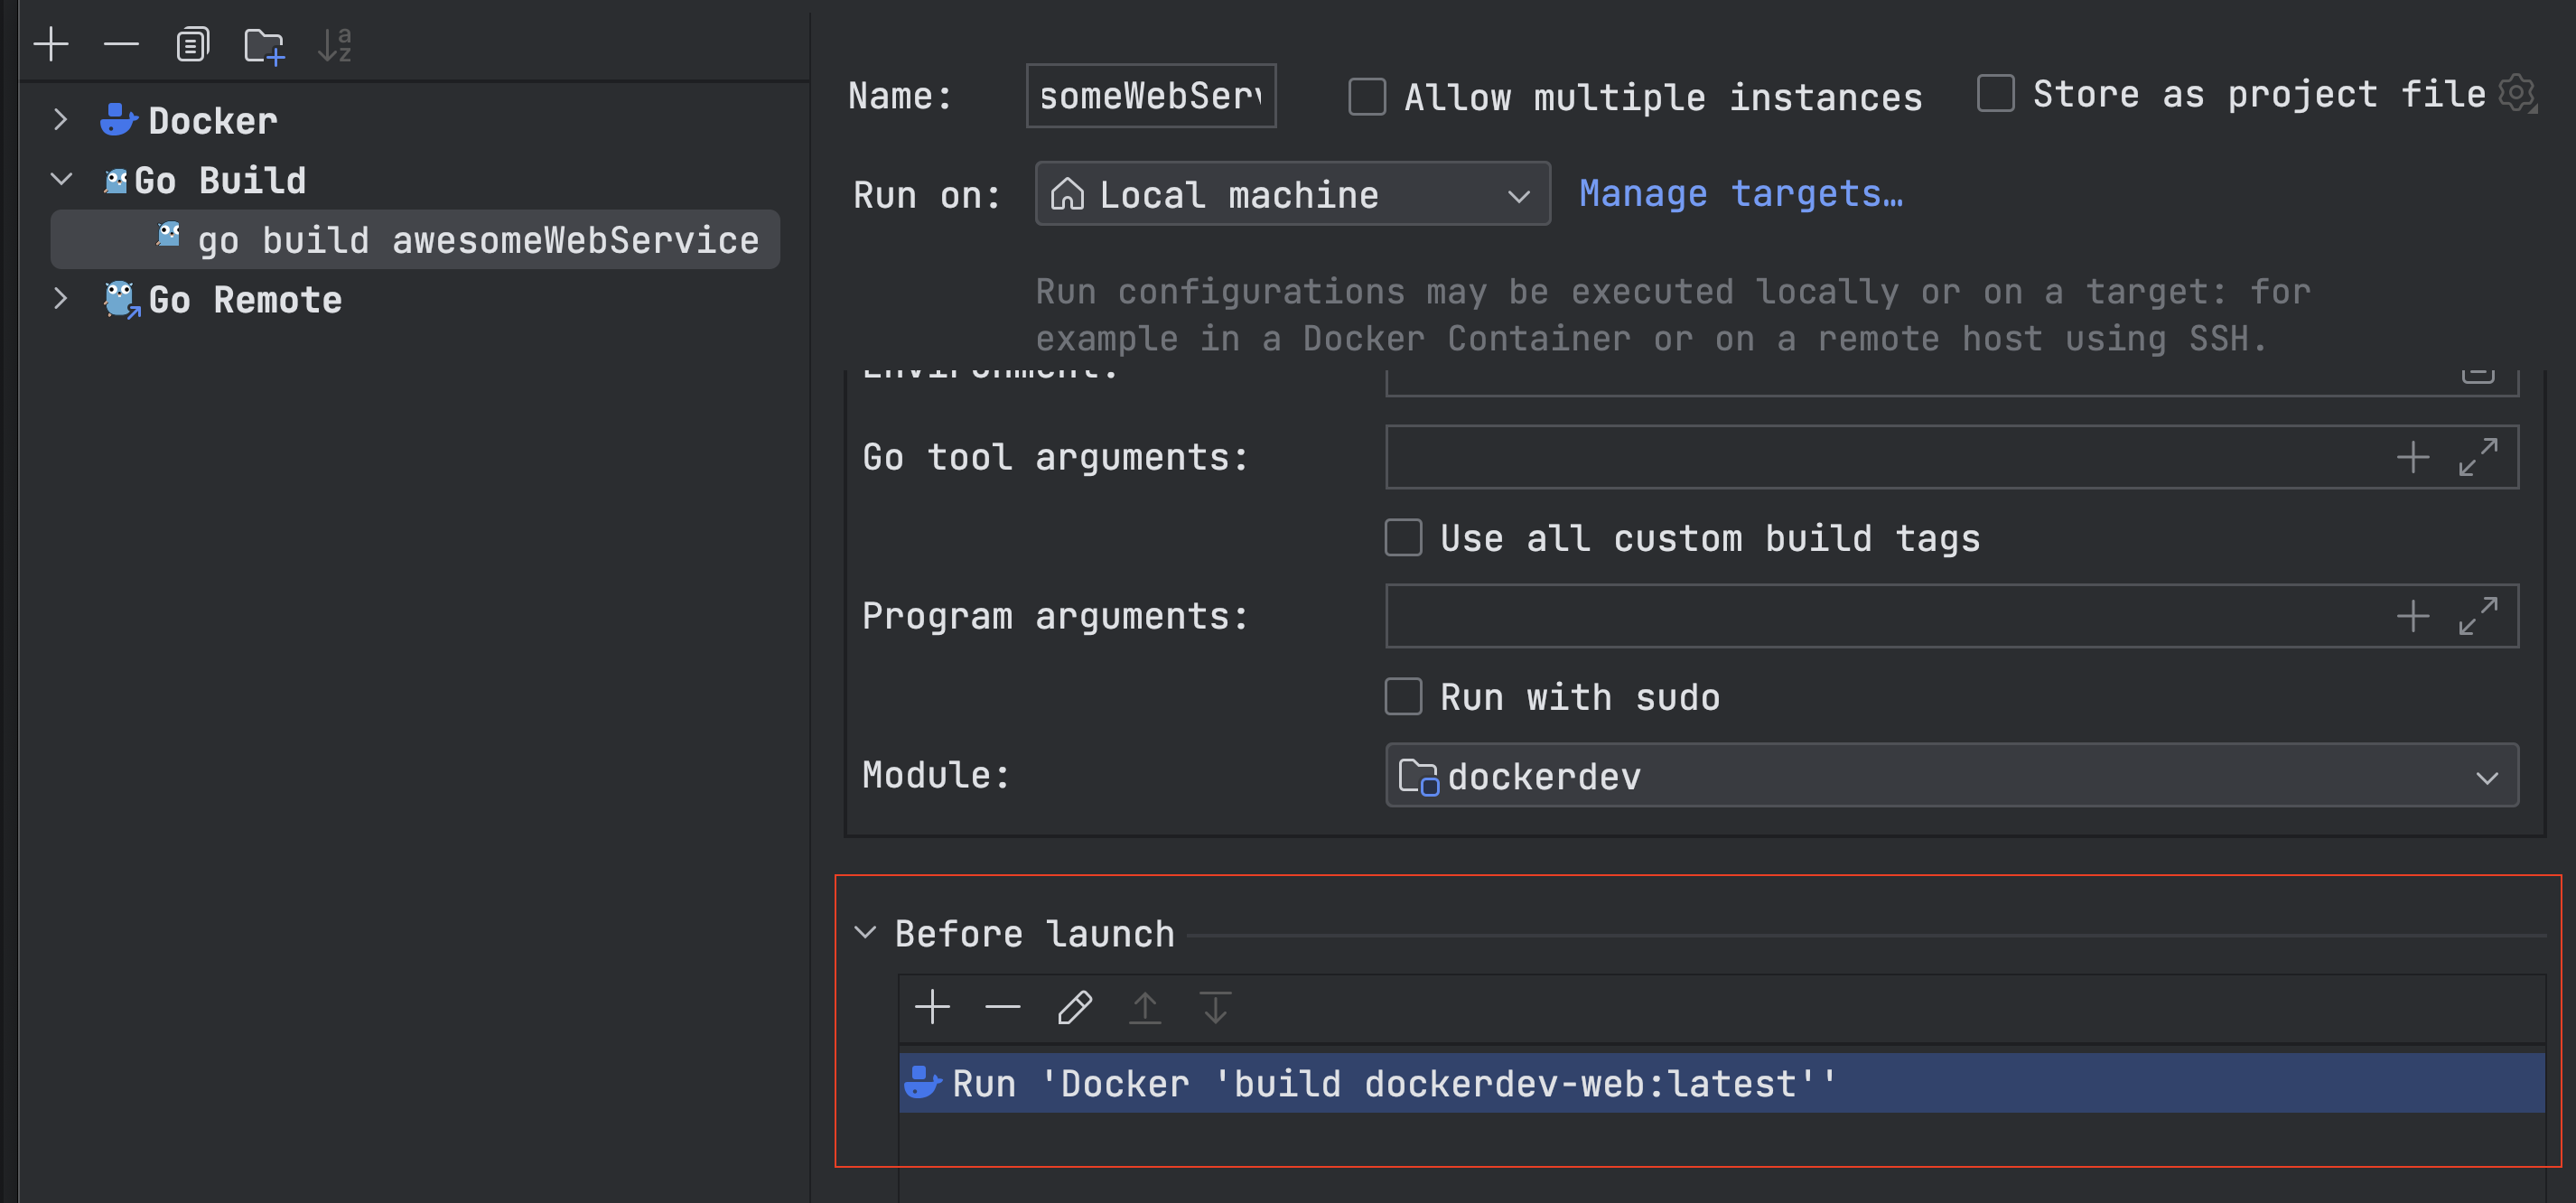 Setting a Docker container to run as a Before Launch task